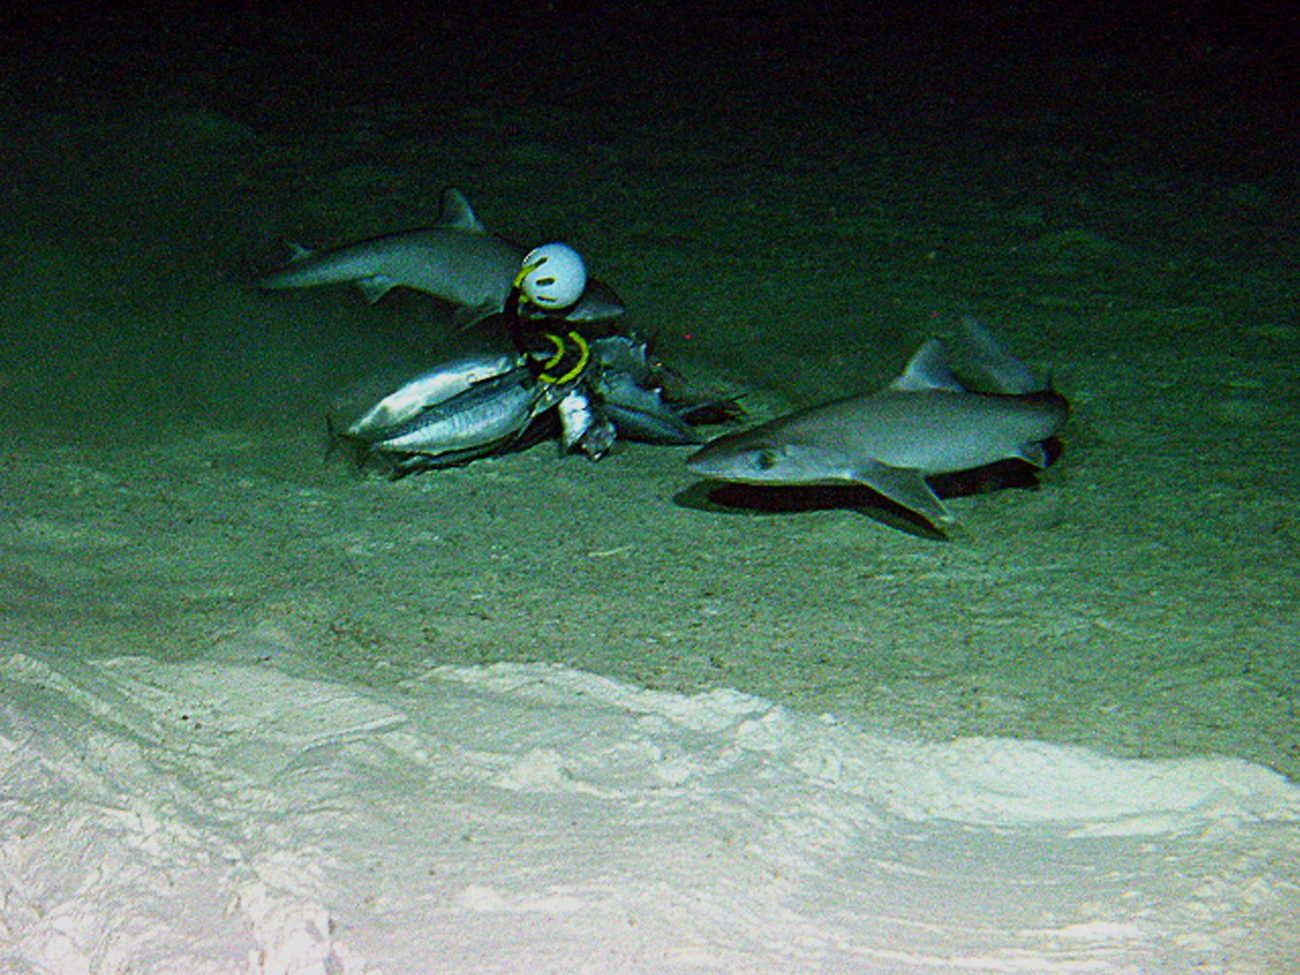 Sharks (Squalus mitsukurii) at a bait station off Maro Reef at 350 meters depth